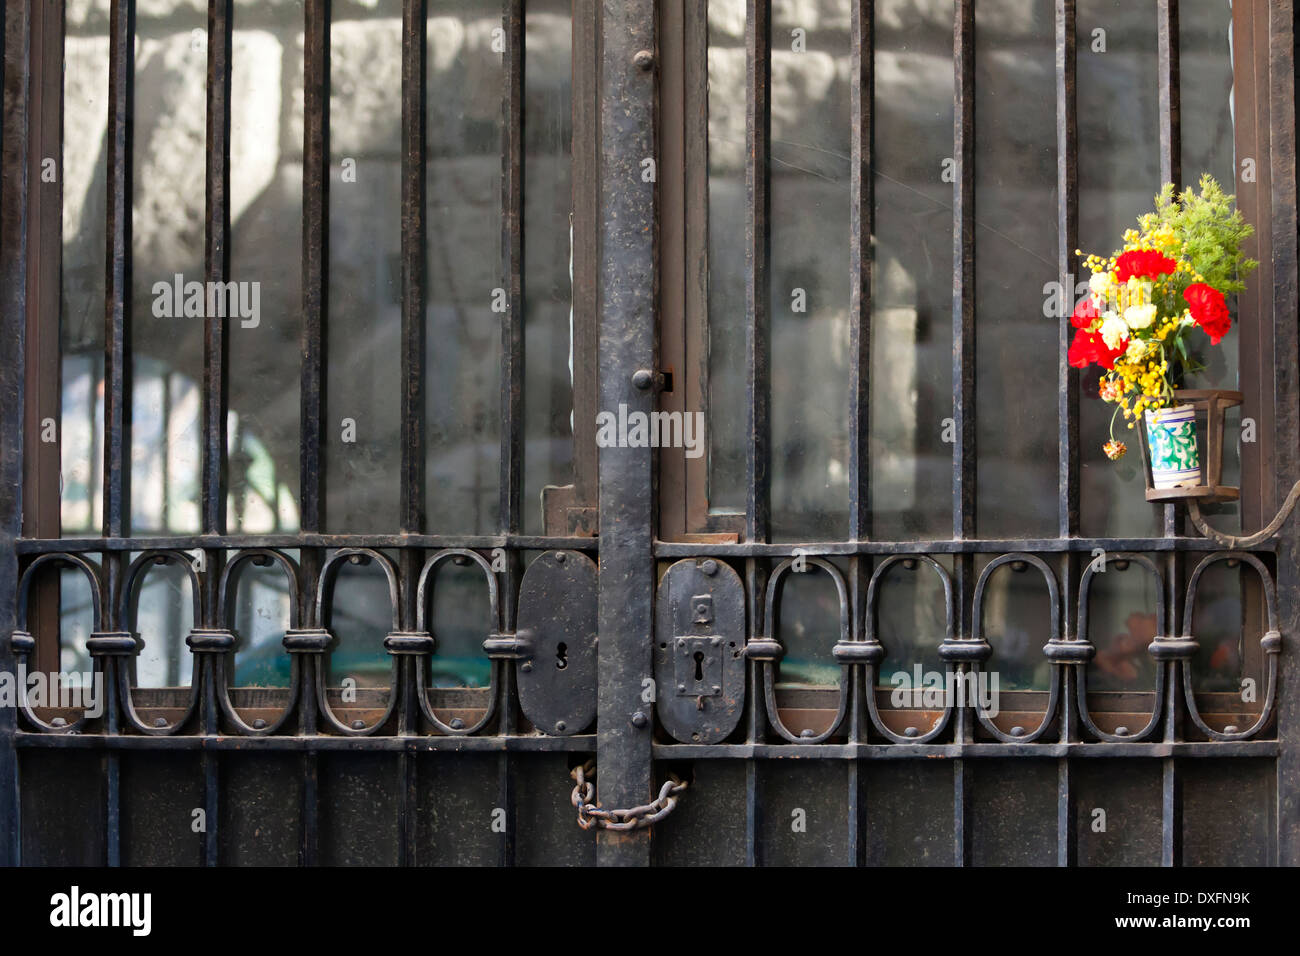 Little vase with colorful flowers at a metal door Stock Photo